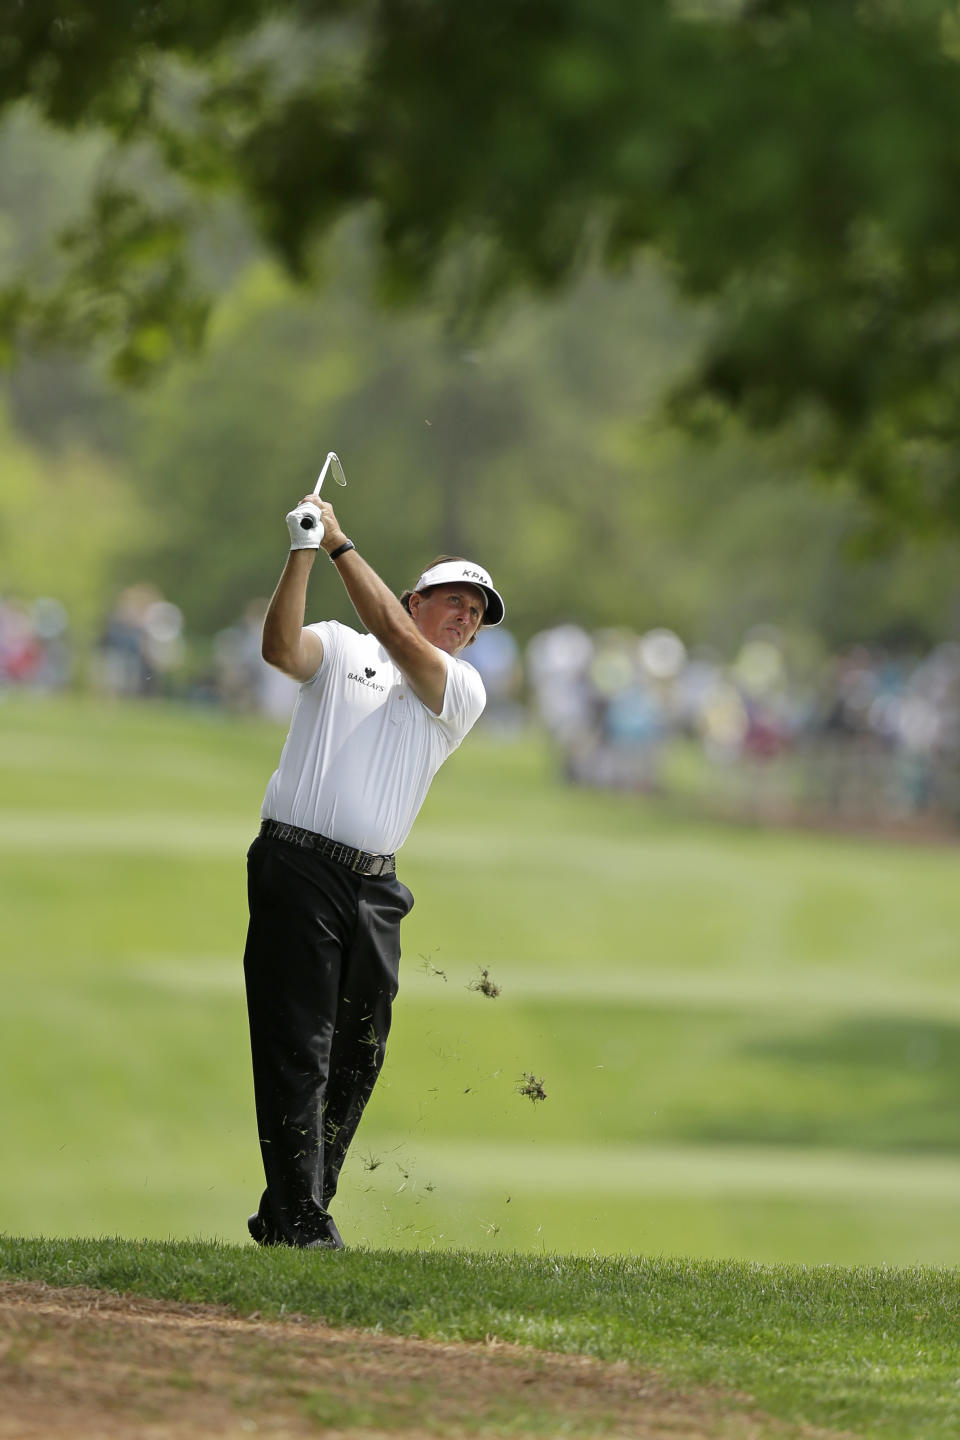 Phil Mickelson watches his approach shot on the fourth hole during the first round of the Wells Fargo Championship golf tournament in Charlotte, N.C., Thursday, May 1, 2014. (AP Photo/Chuck Burton)